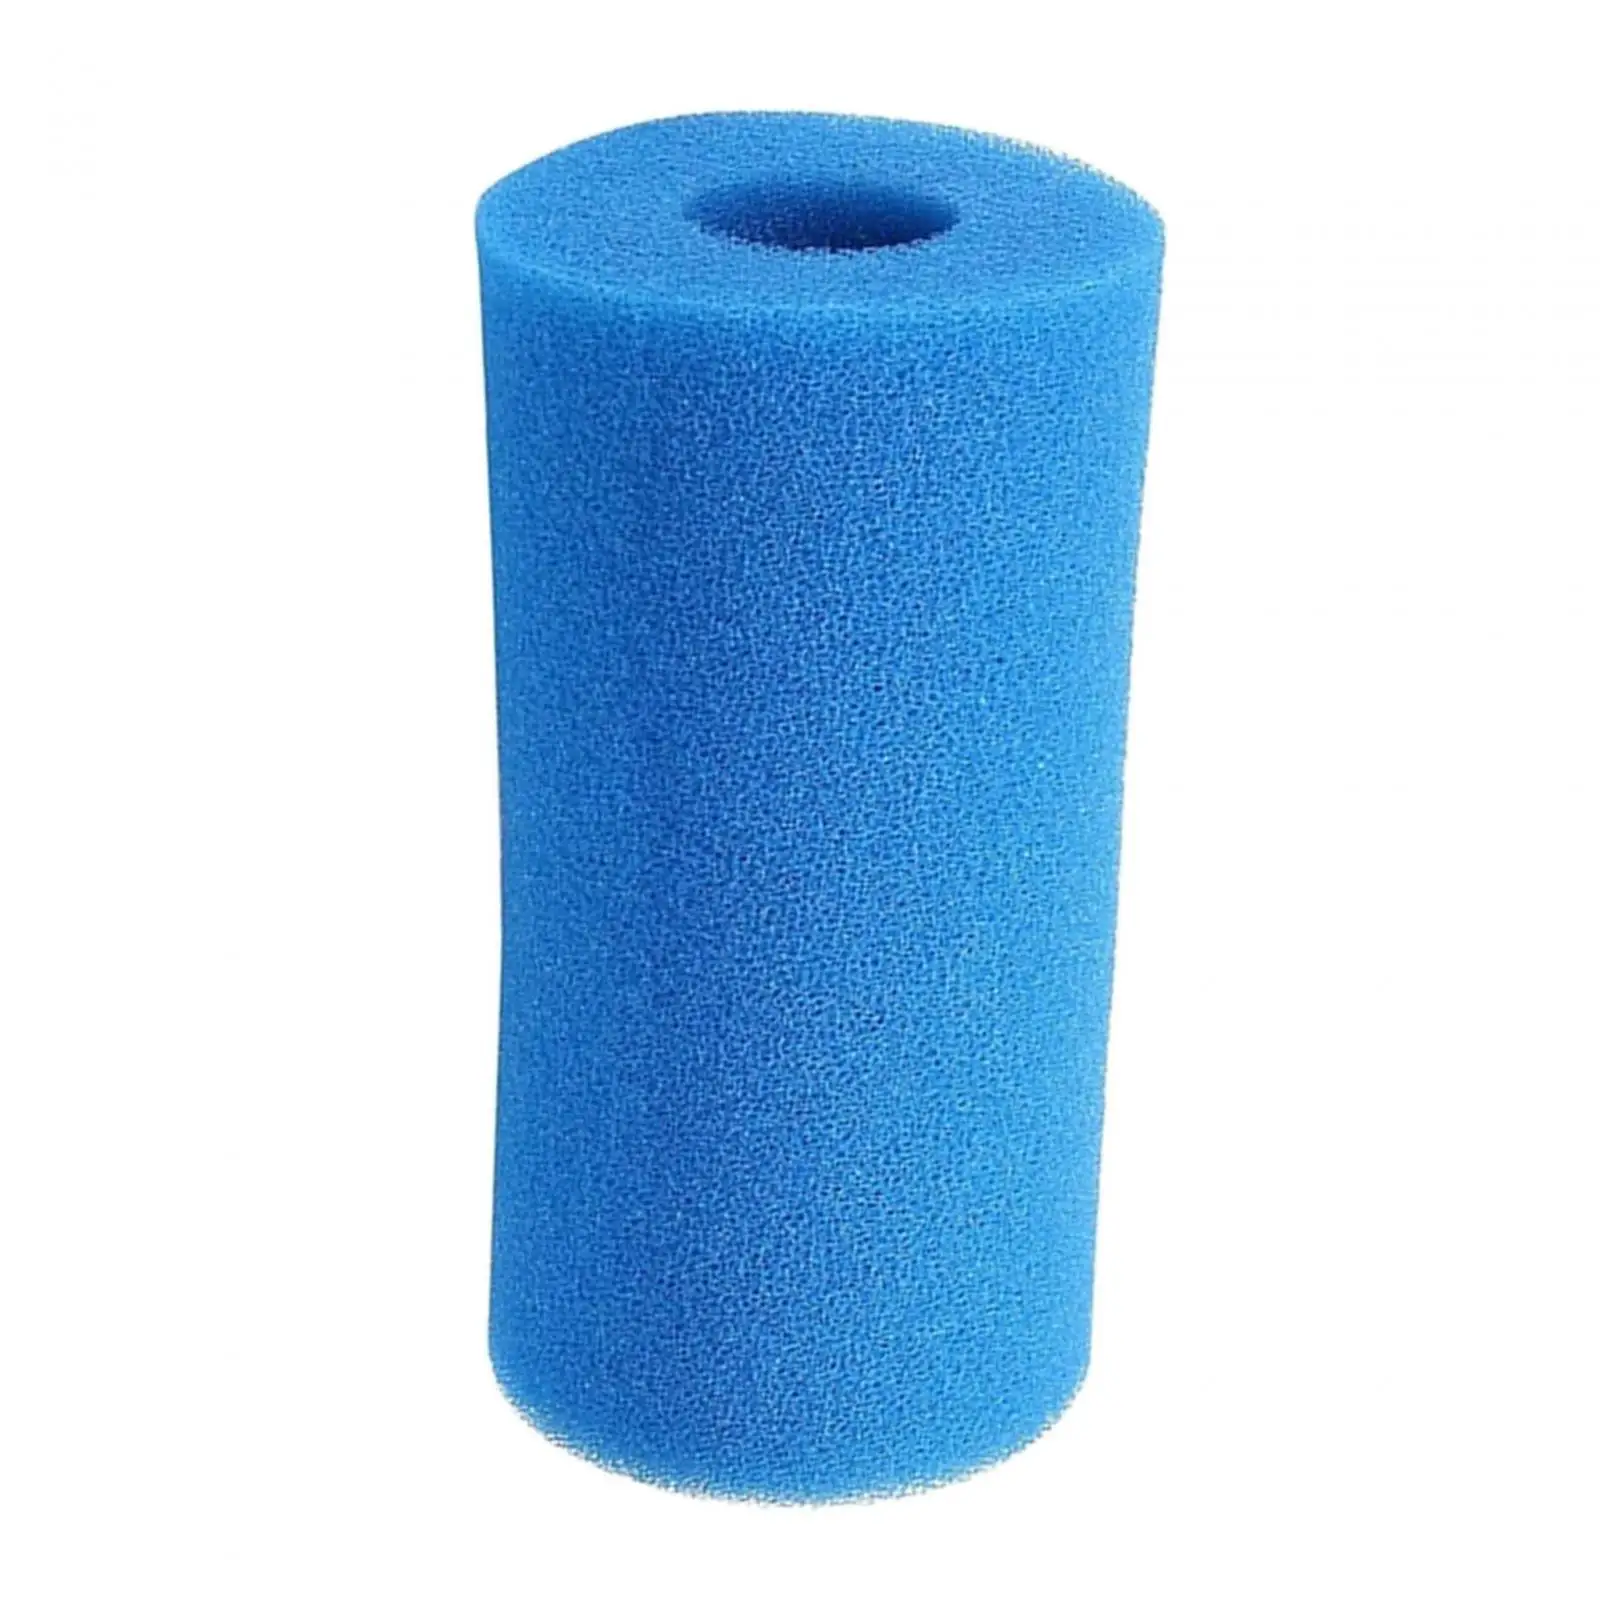 Pool Filter Cartridge Filter Pump Cartridge Washable Professional Easy to Clean Durable Replace Pool Sponge Filter for Type B